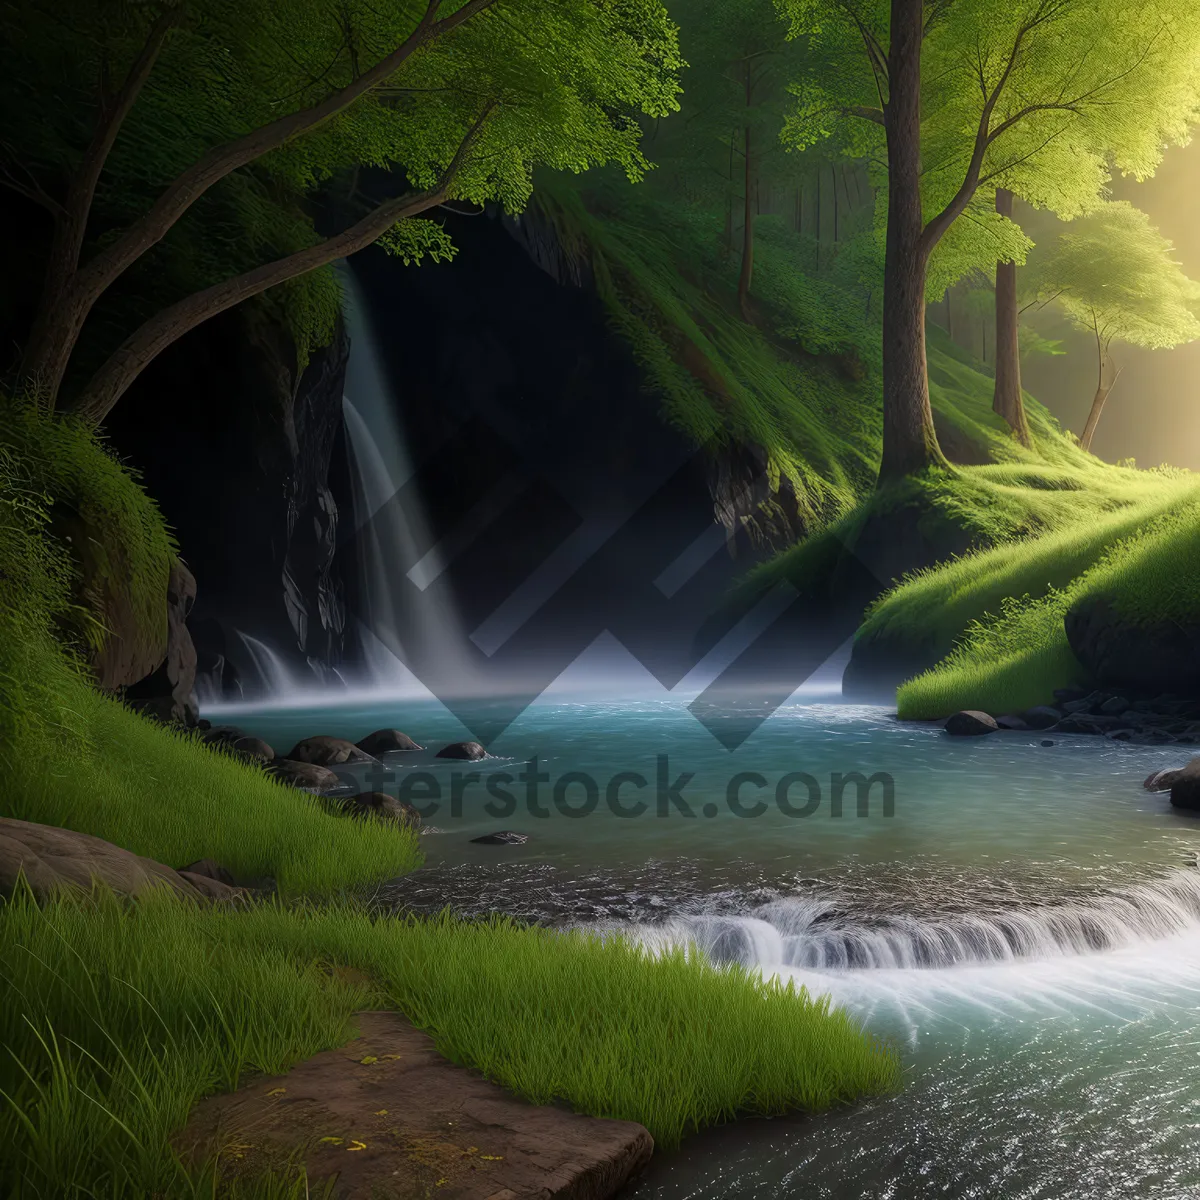 Picture of Serene Waterfall in Lush Forest: Captivating Nature's Flow